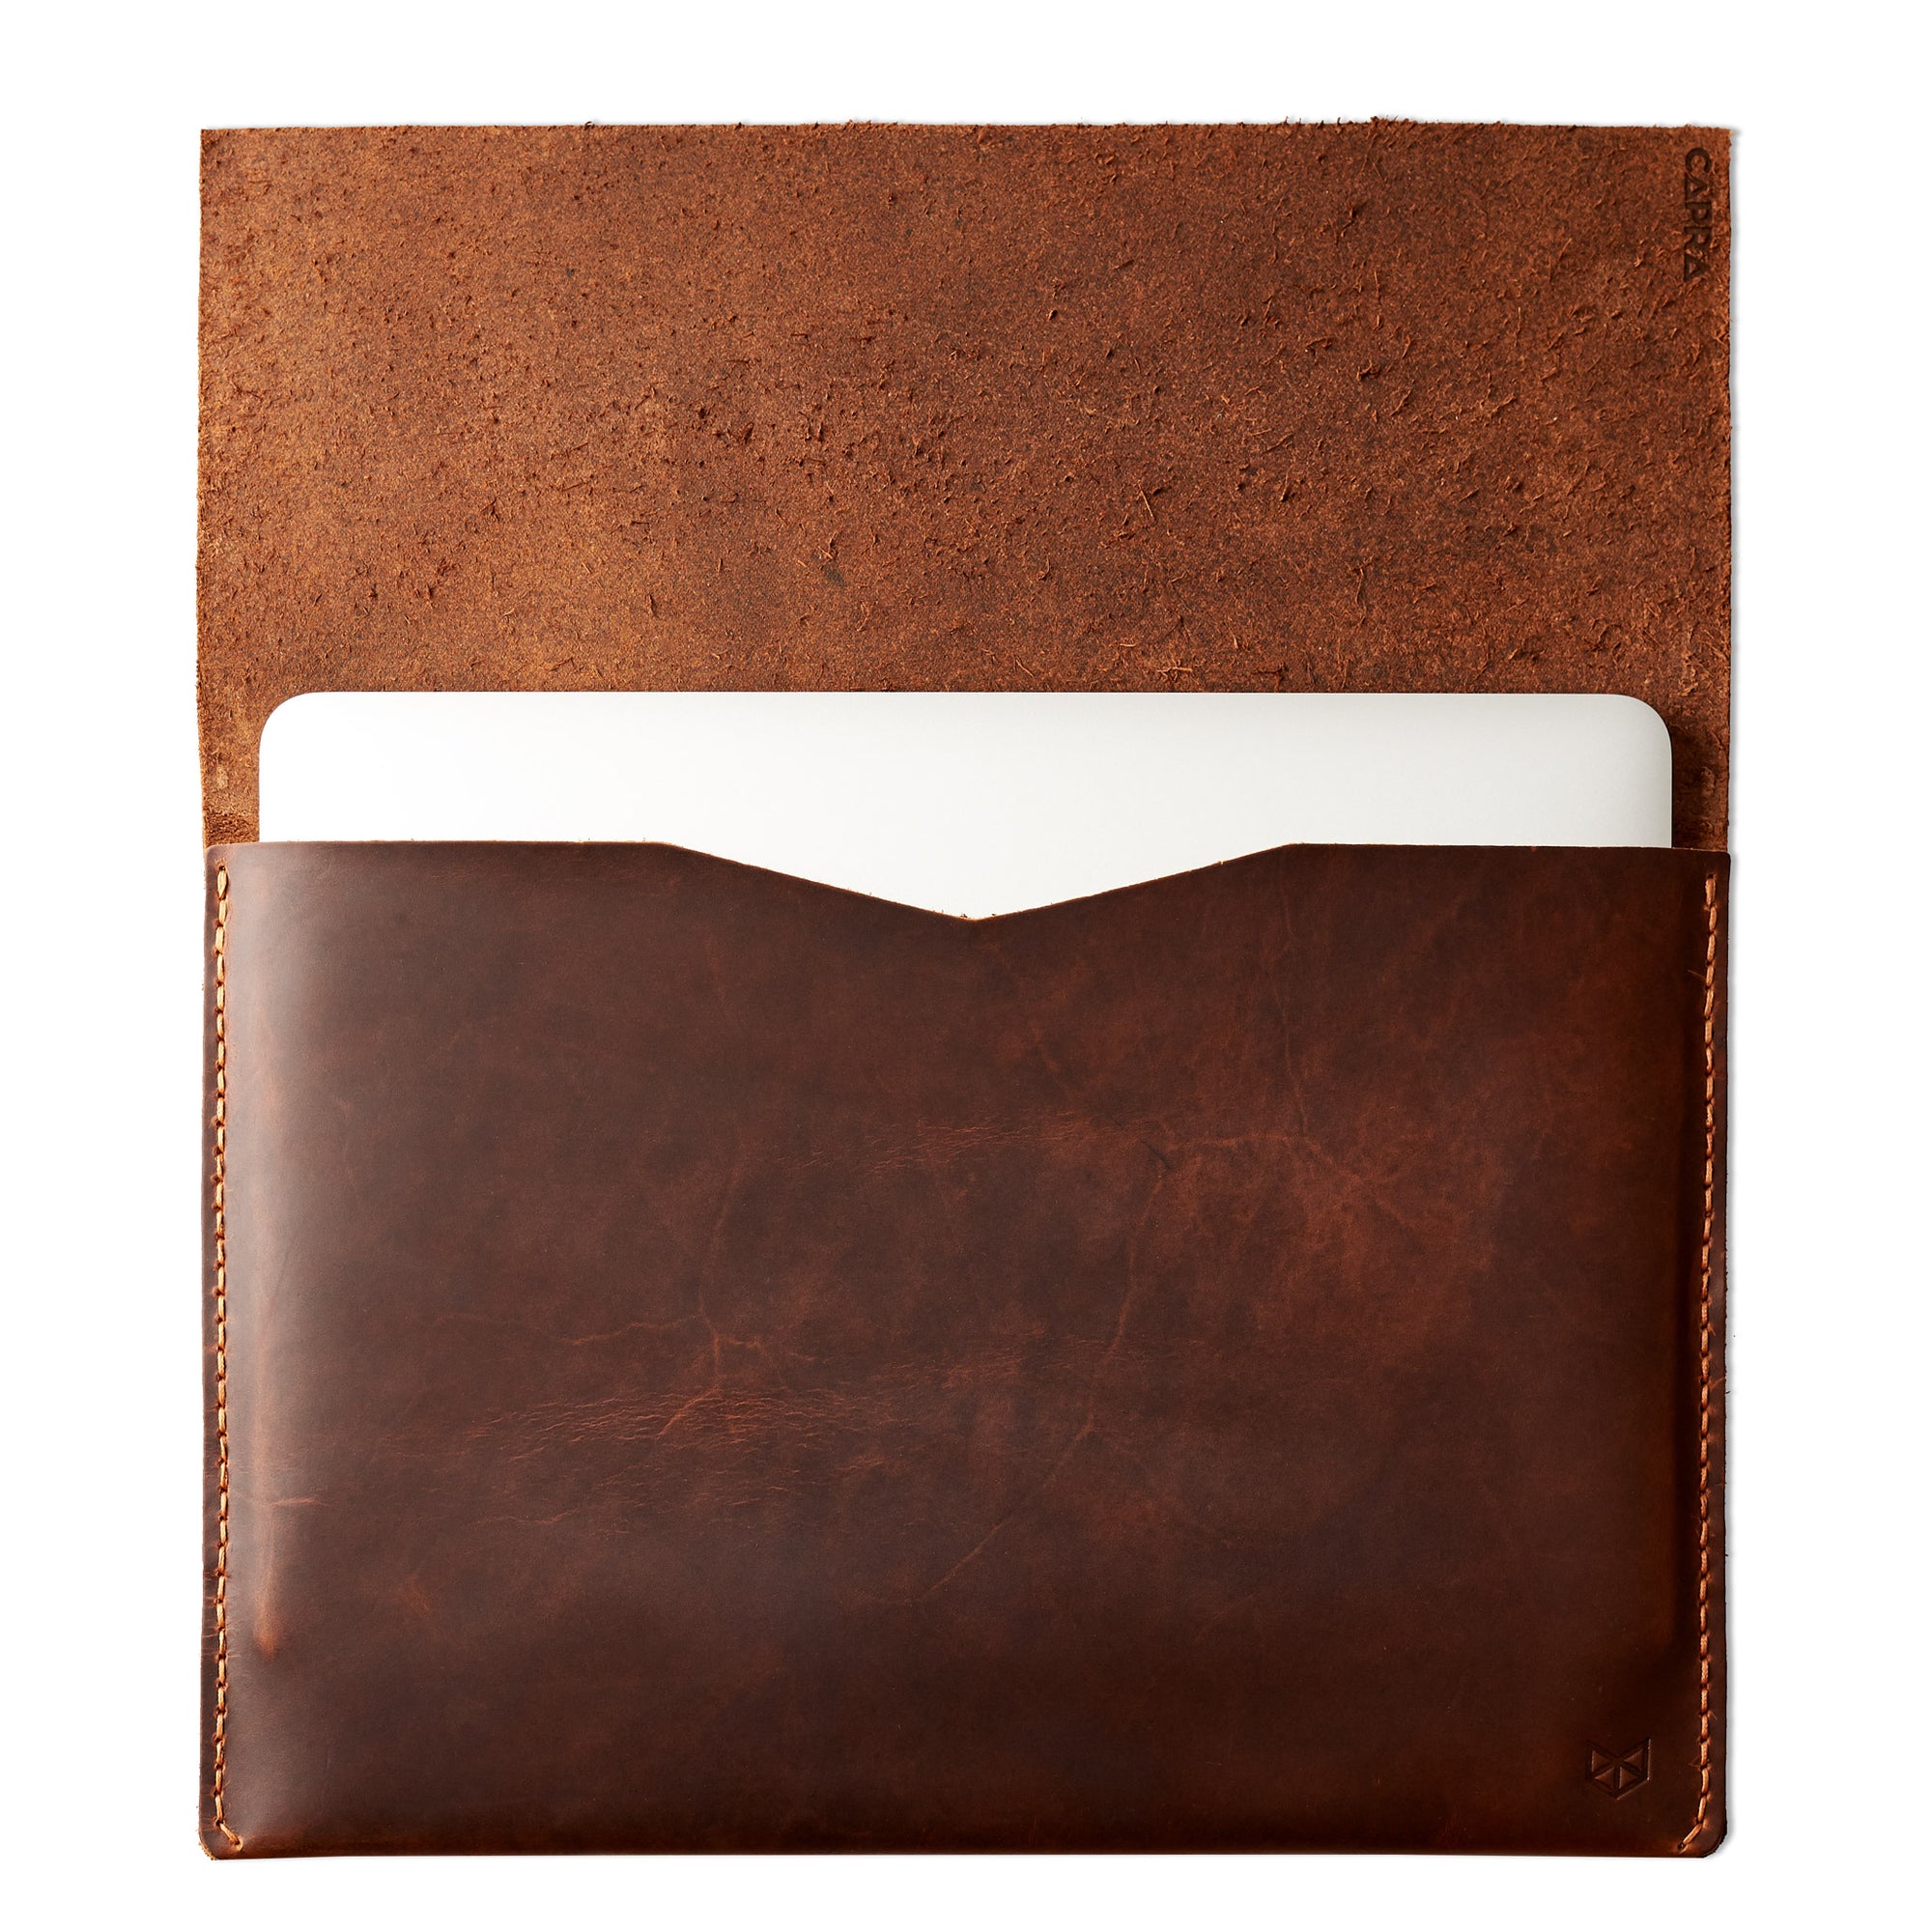 Open. Distressed Tan Leather MacBook Case. MacBook Sleeve by Capra Leather